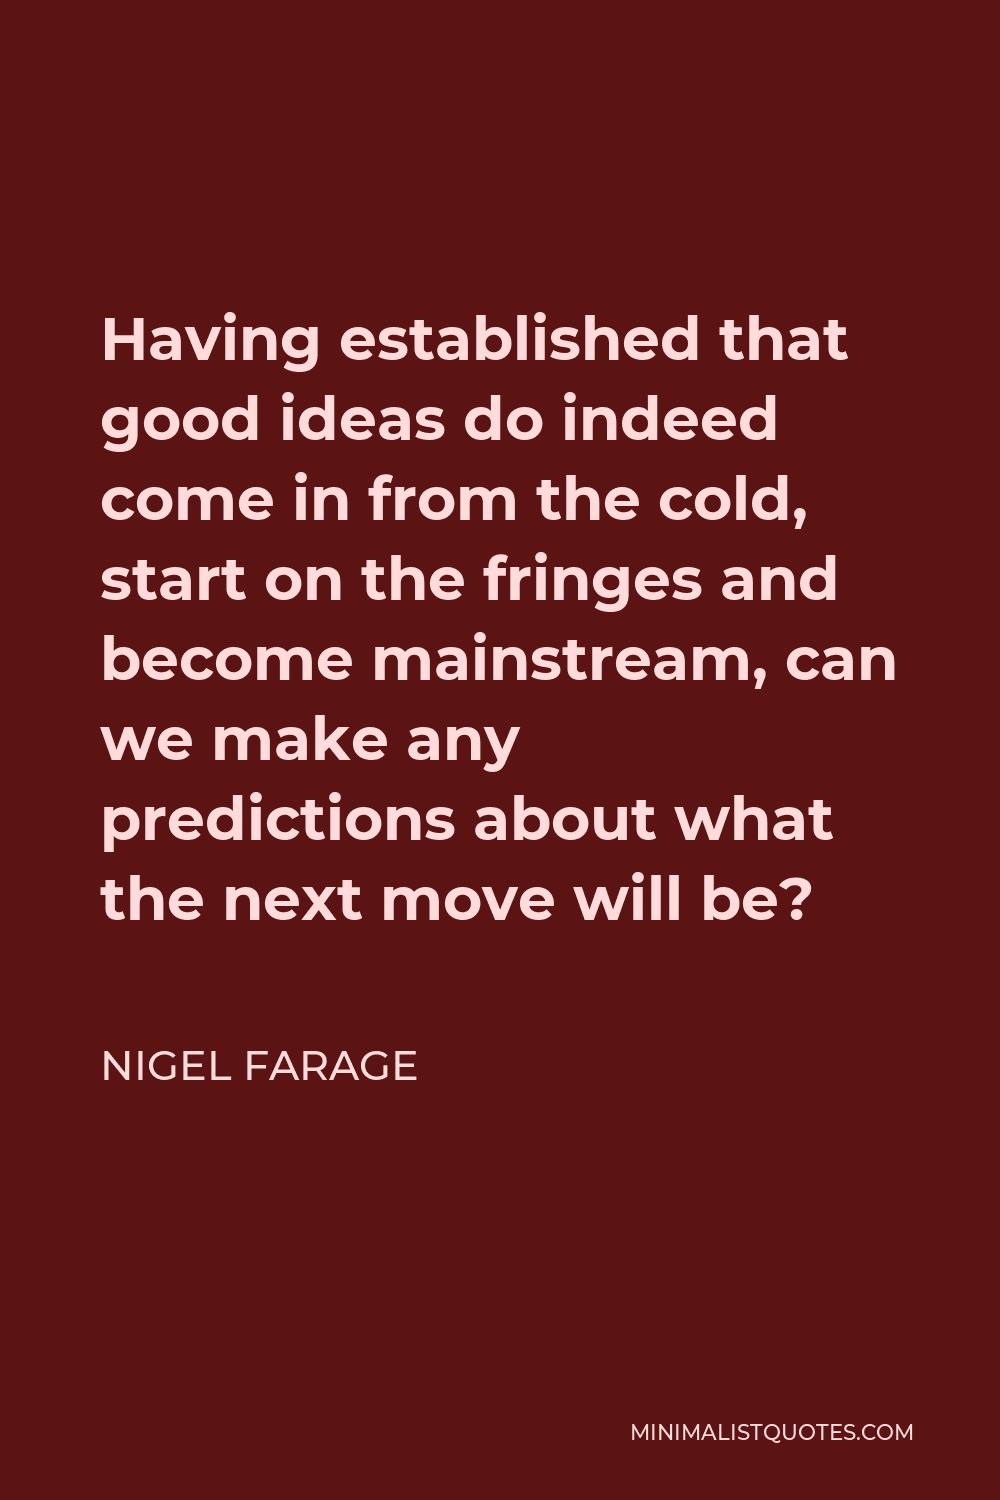 Nigel Farage Quote - Having established that good ideas do indeed come in from the cold, start on the fringes and become mainstream, can we make any predictions about what the next move will be?